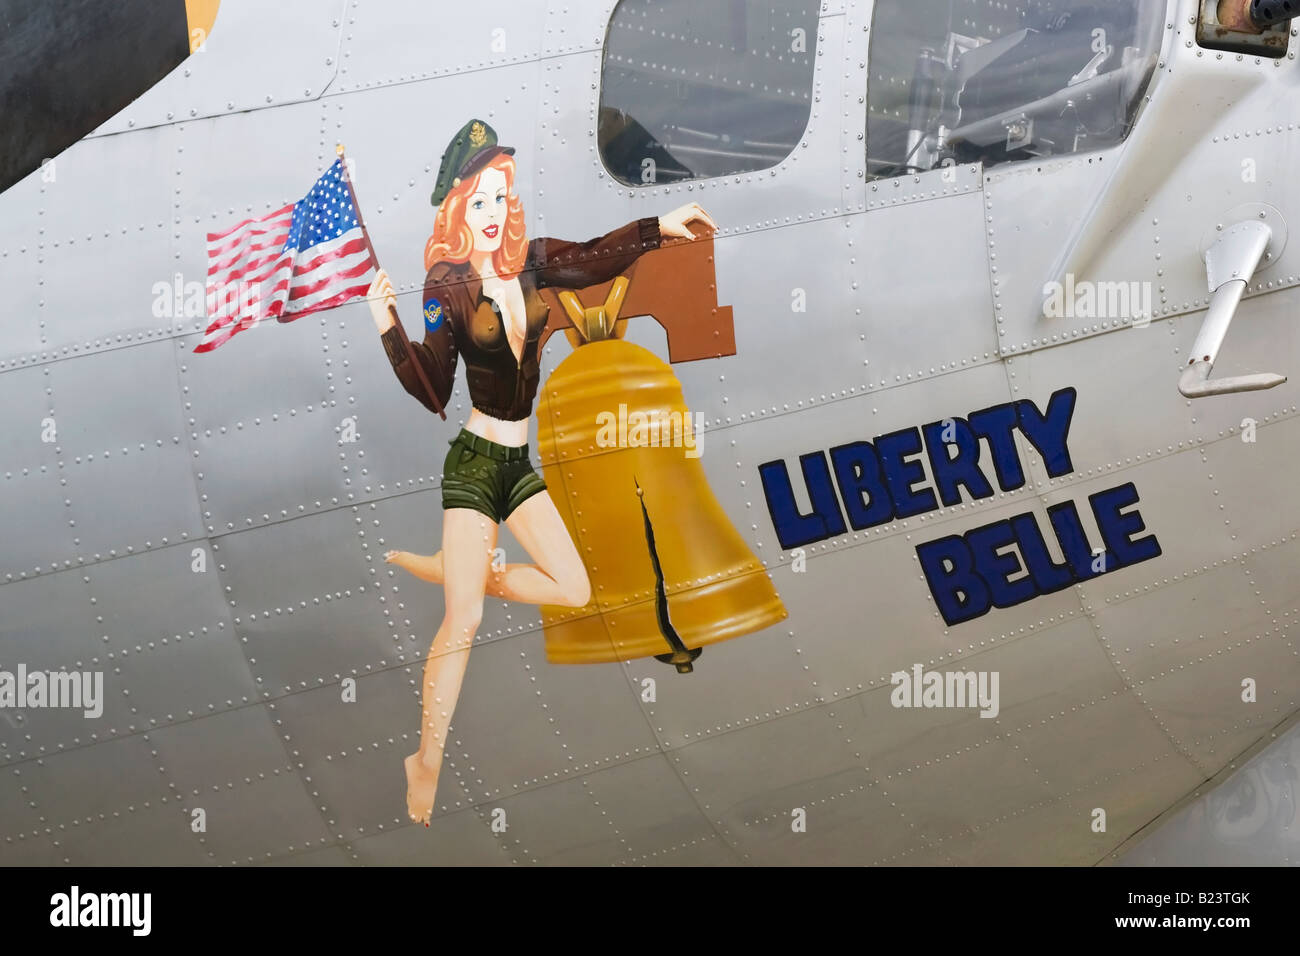 Boeing B17G Flying Fortresss nose art Liberty Belle Stock Photo